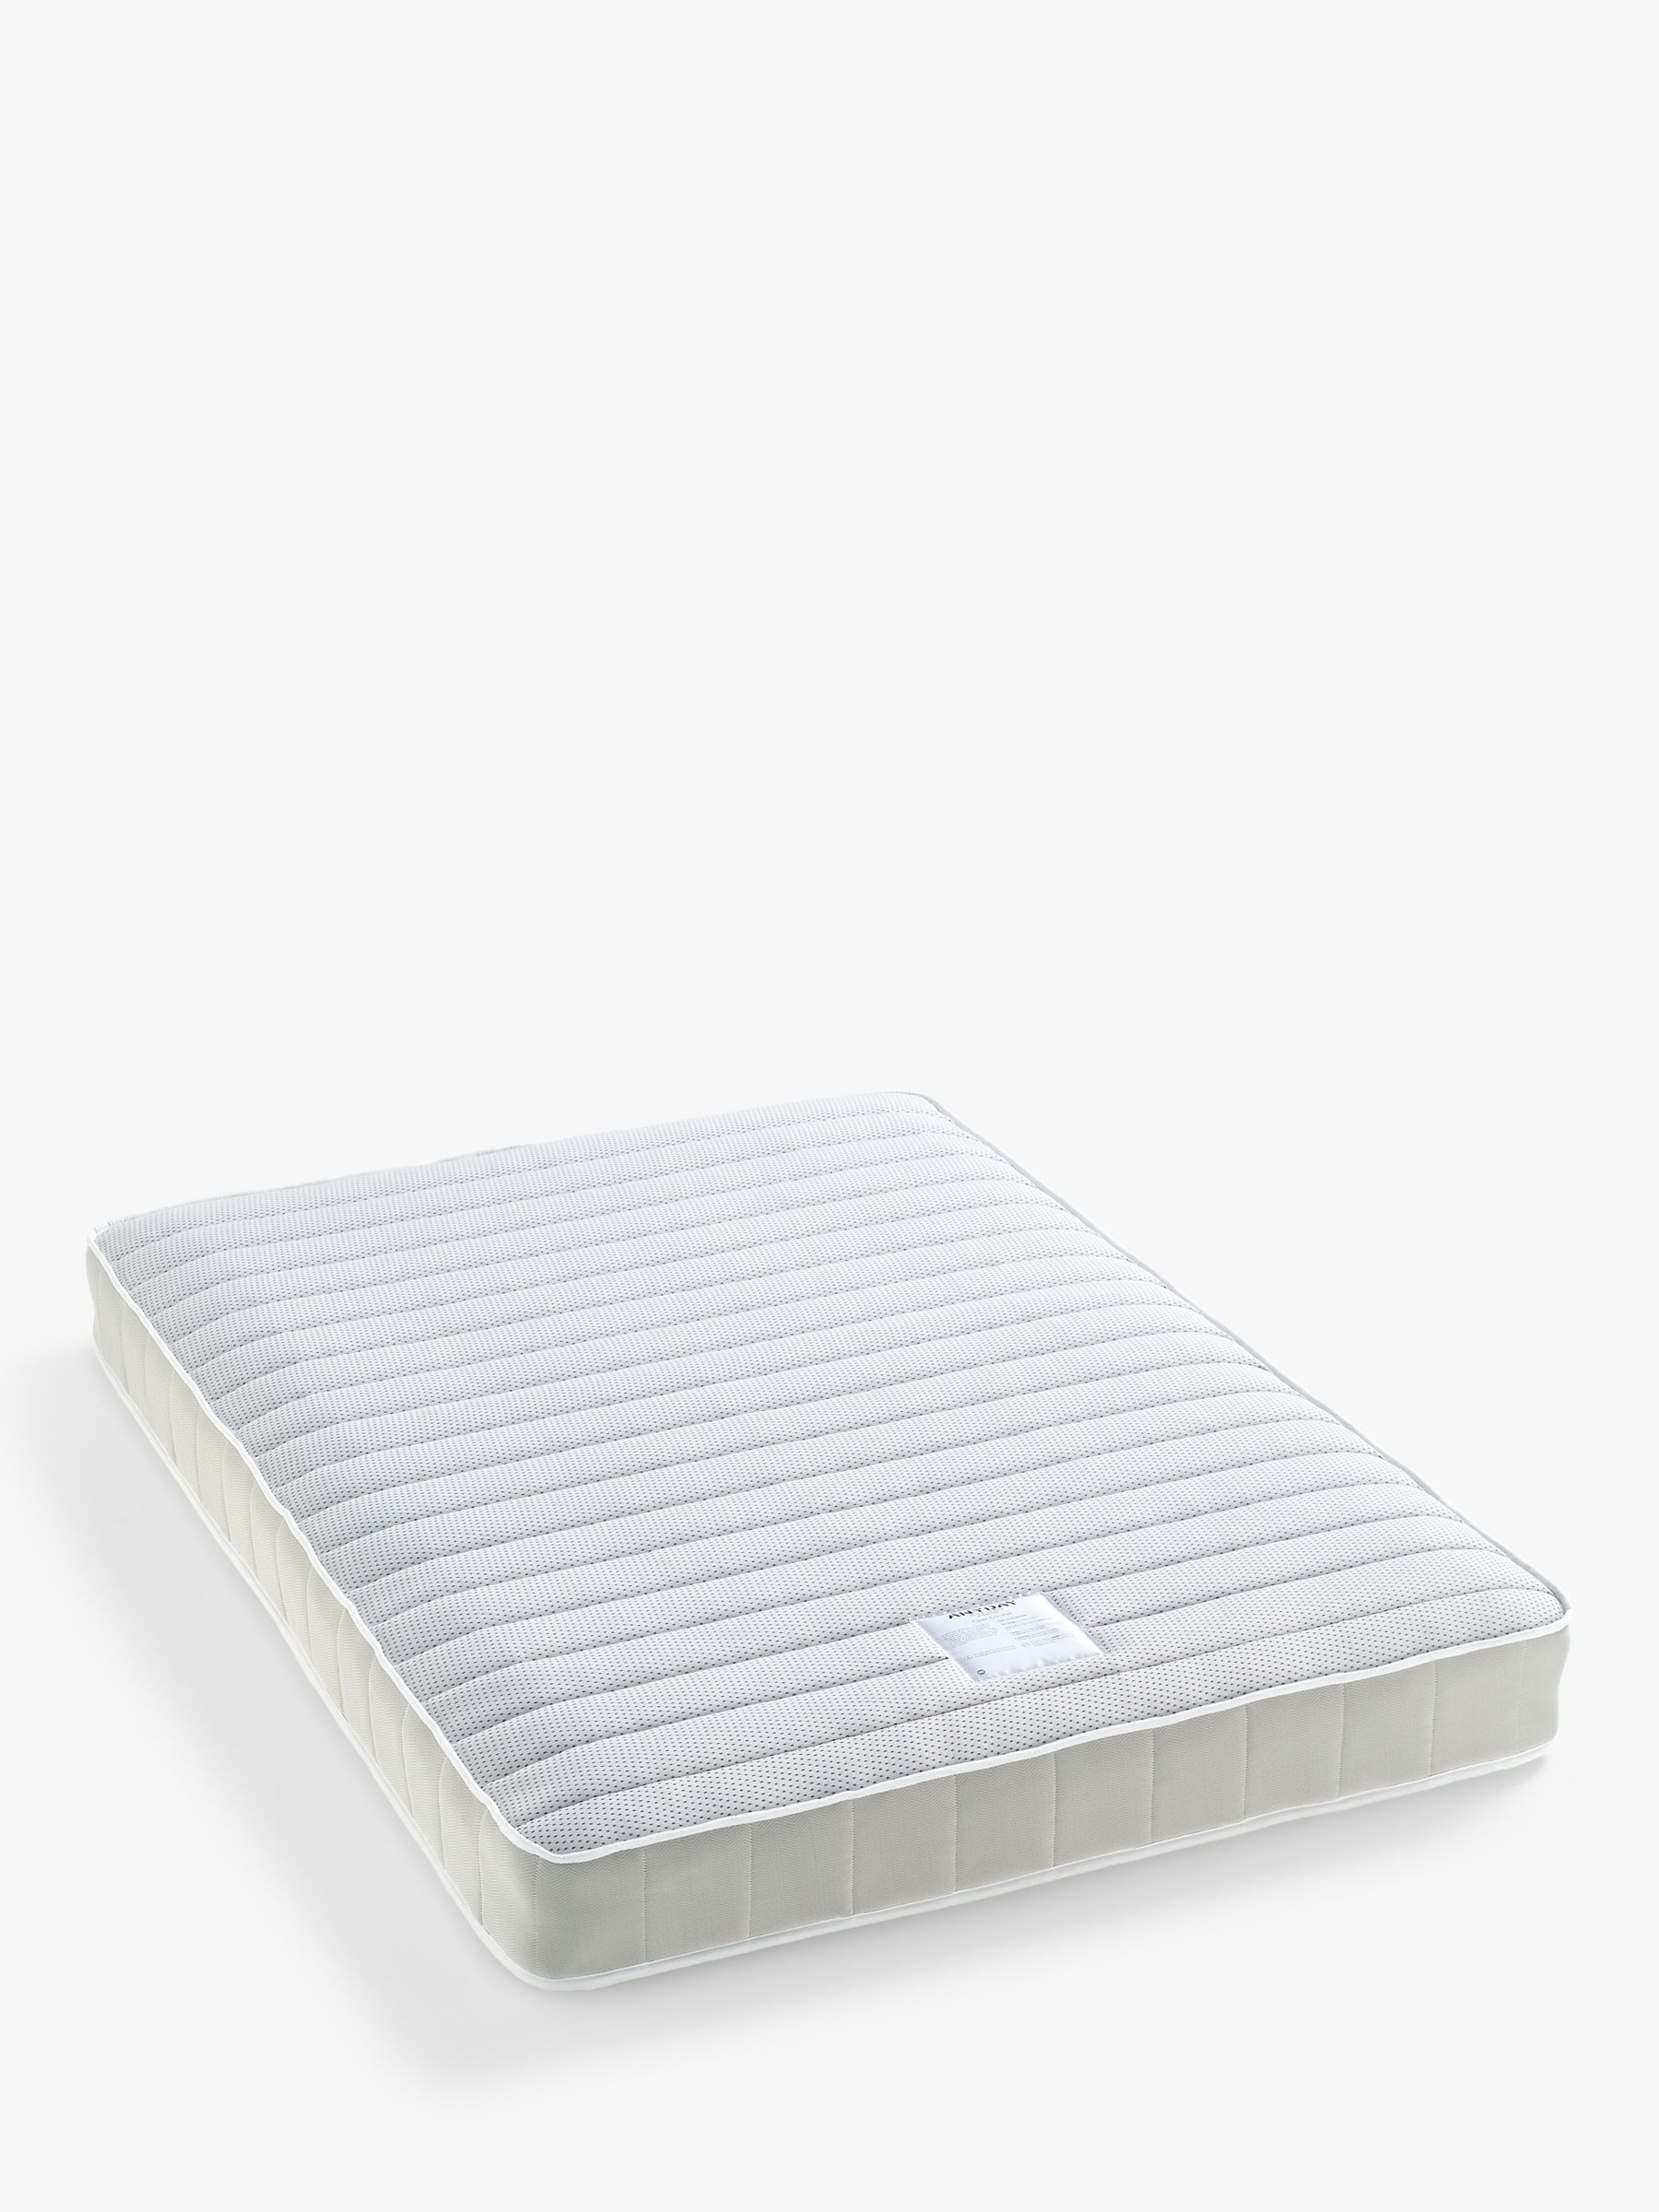 Photo of John lewis anyday open spring comfort rolled mattress medium/firm tension king size